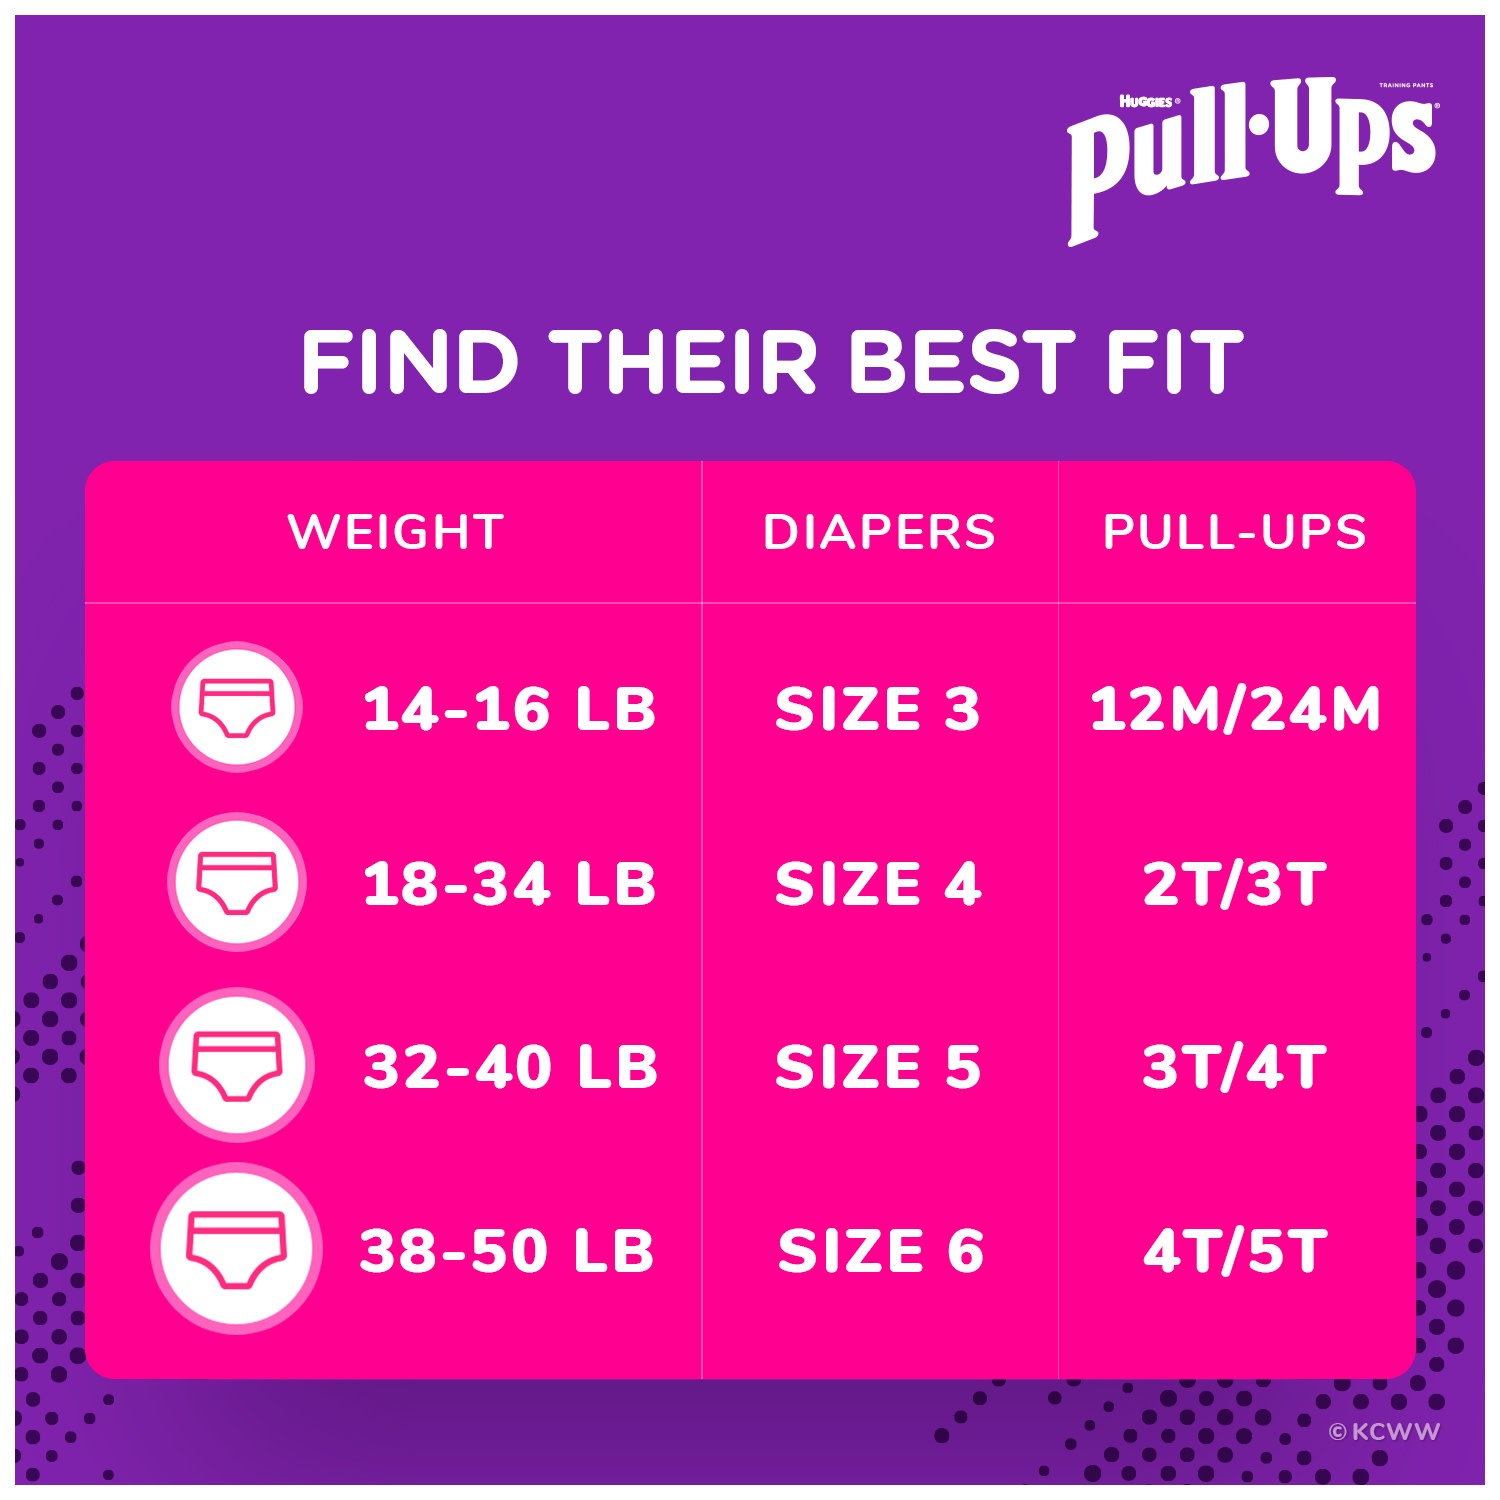 Pull-Ups Girls' Potty Training Pants Size 5, 3T-4T, 66 Ct - image 4 of 9